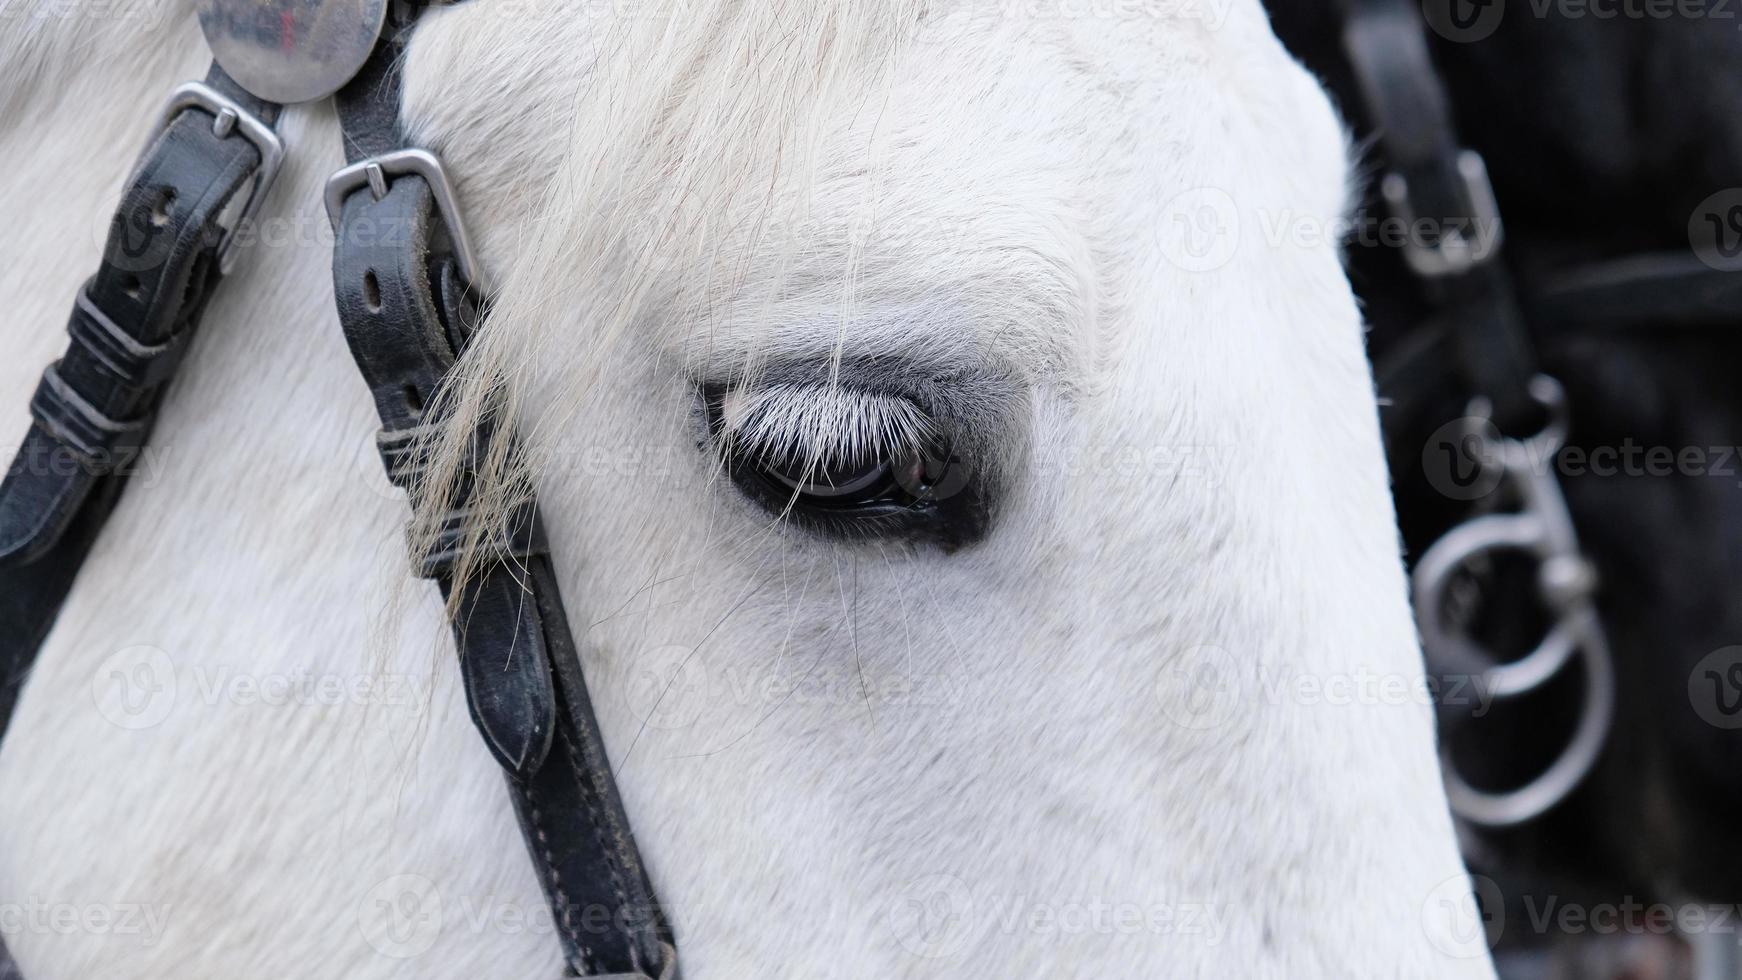 Close-up of horse's eye with white eyelashes. Portrait of a white horse with a bridle on the muzzle, of equipment and harness worn on the horse's head for control. Livestock and Horse life. photo